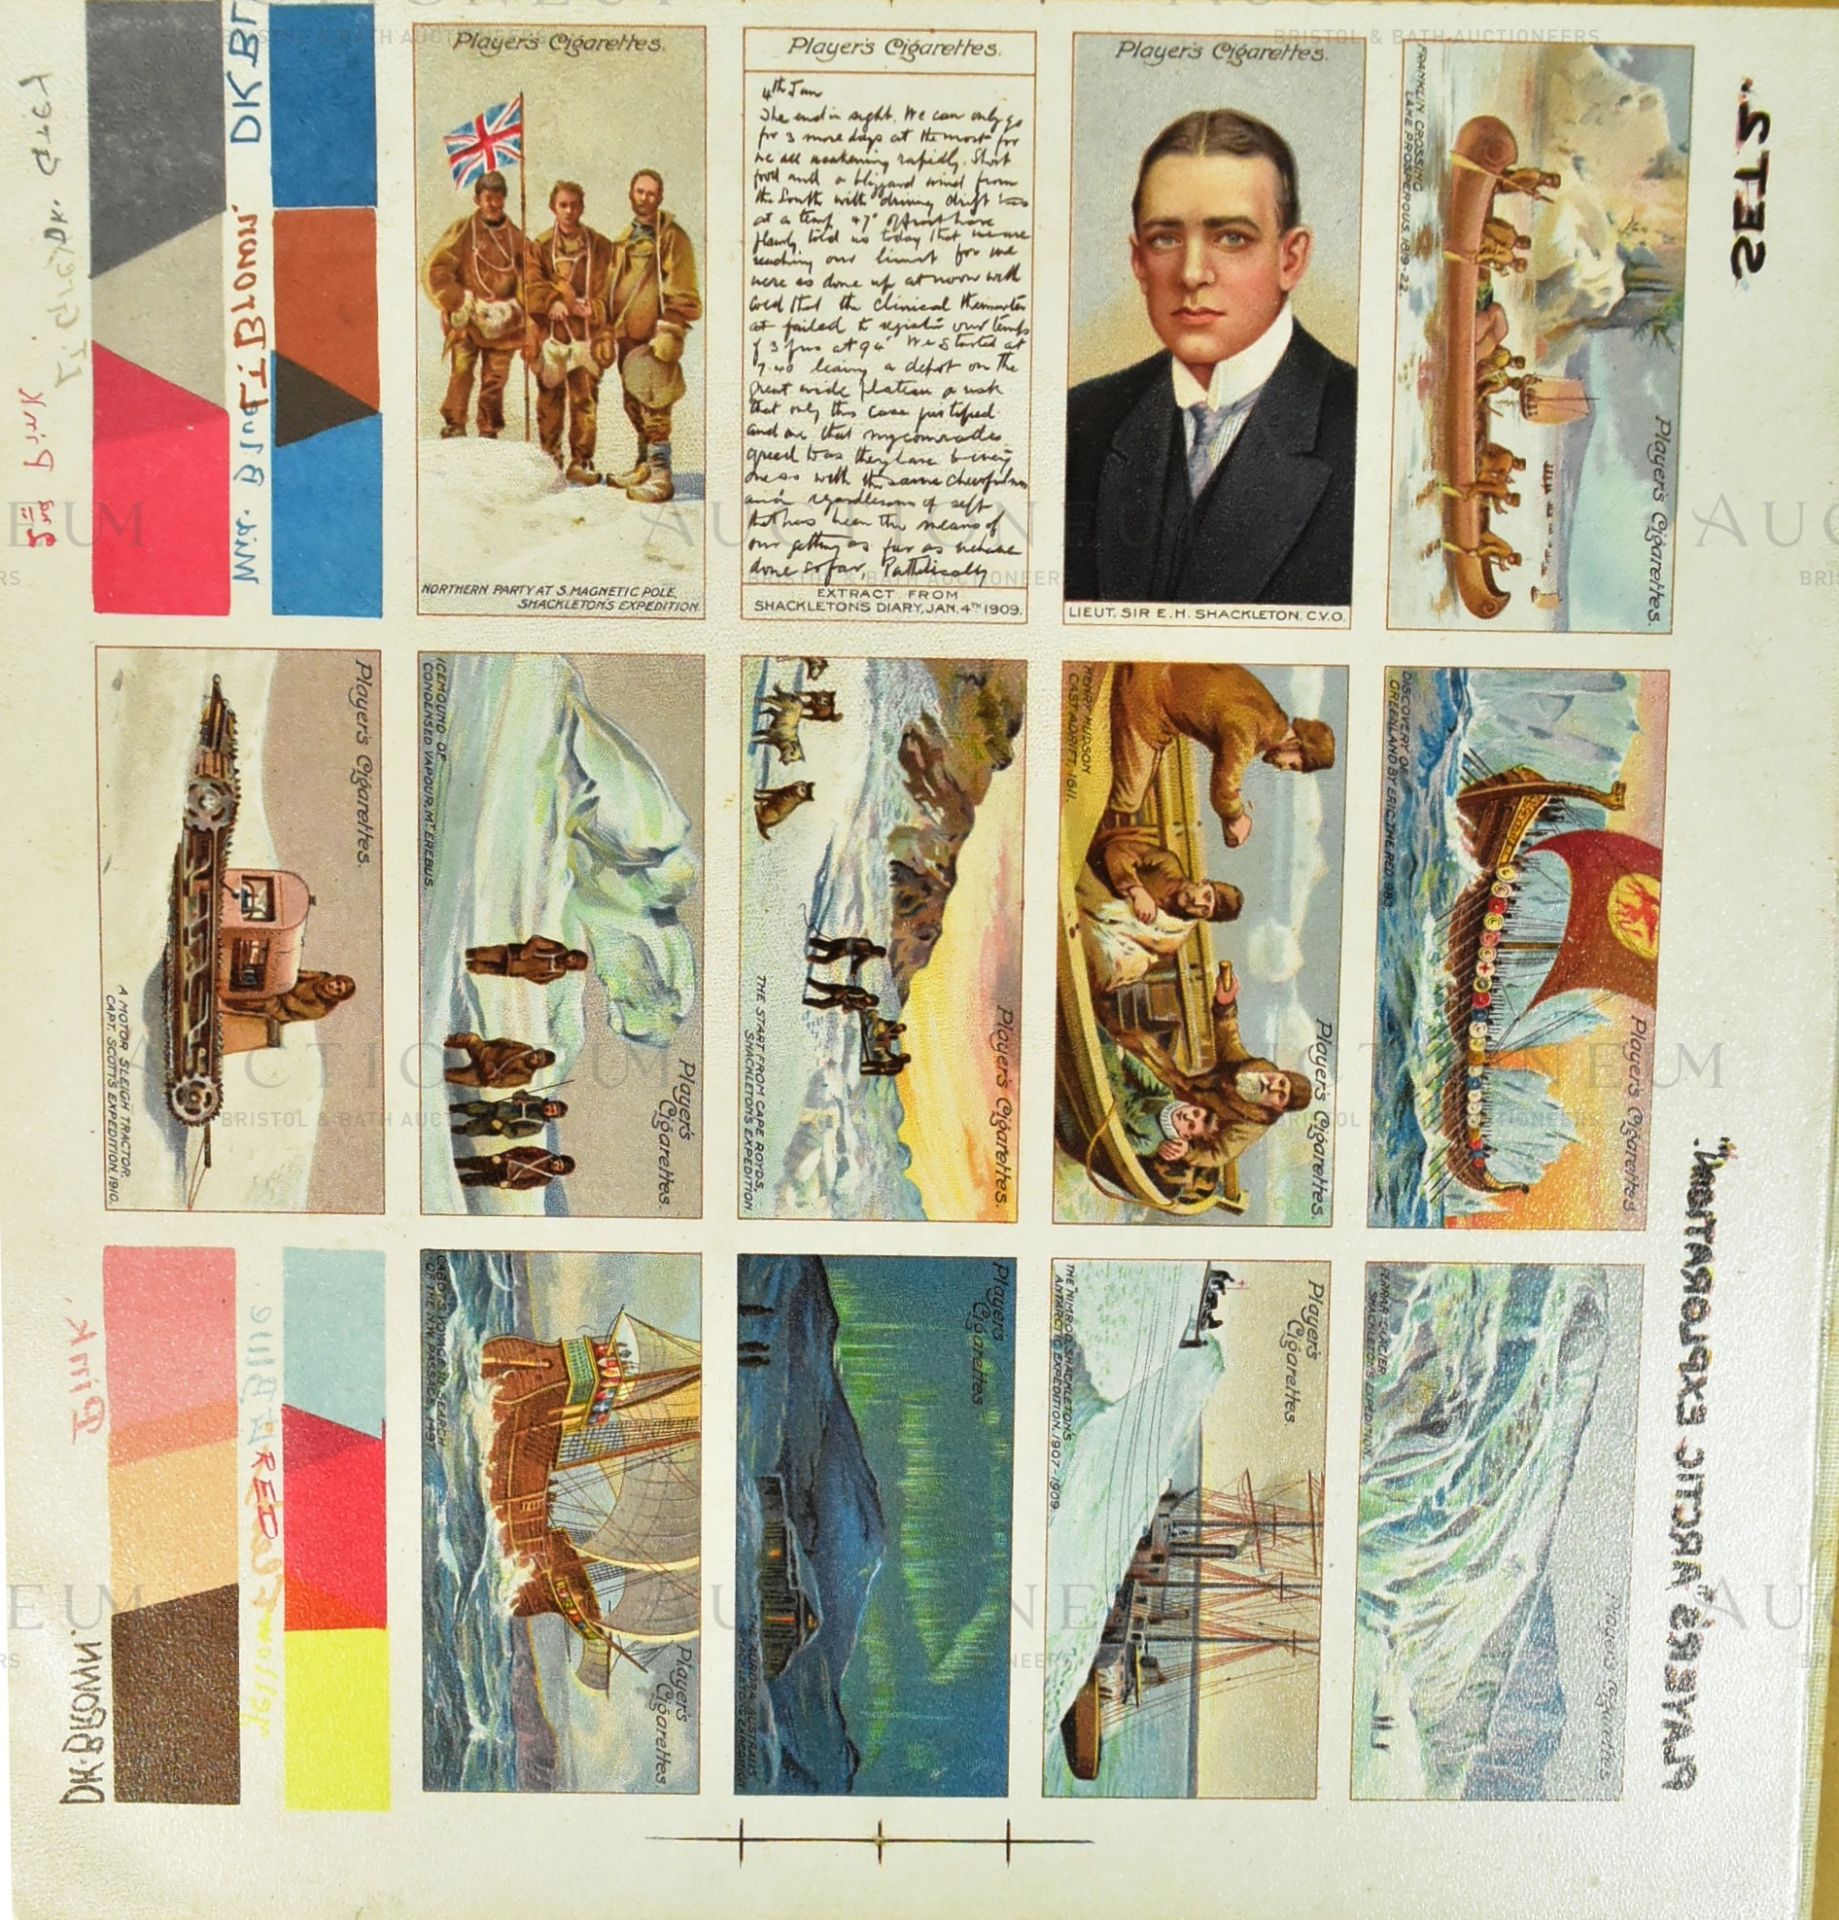 PLAYER'S CIGARETTE CARDS - ANTARCTIC EXPEDITION UNPRODUCED SERIES ARCHIVE - Image 3 of 8